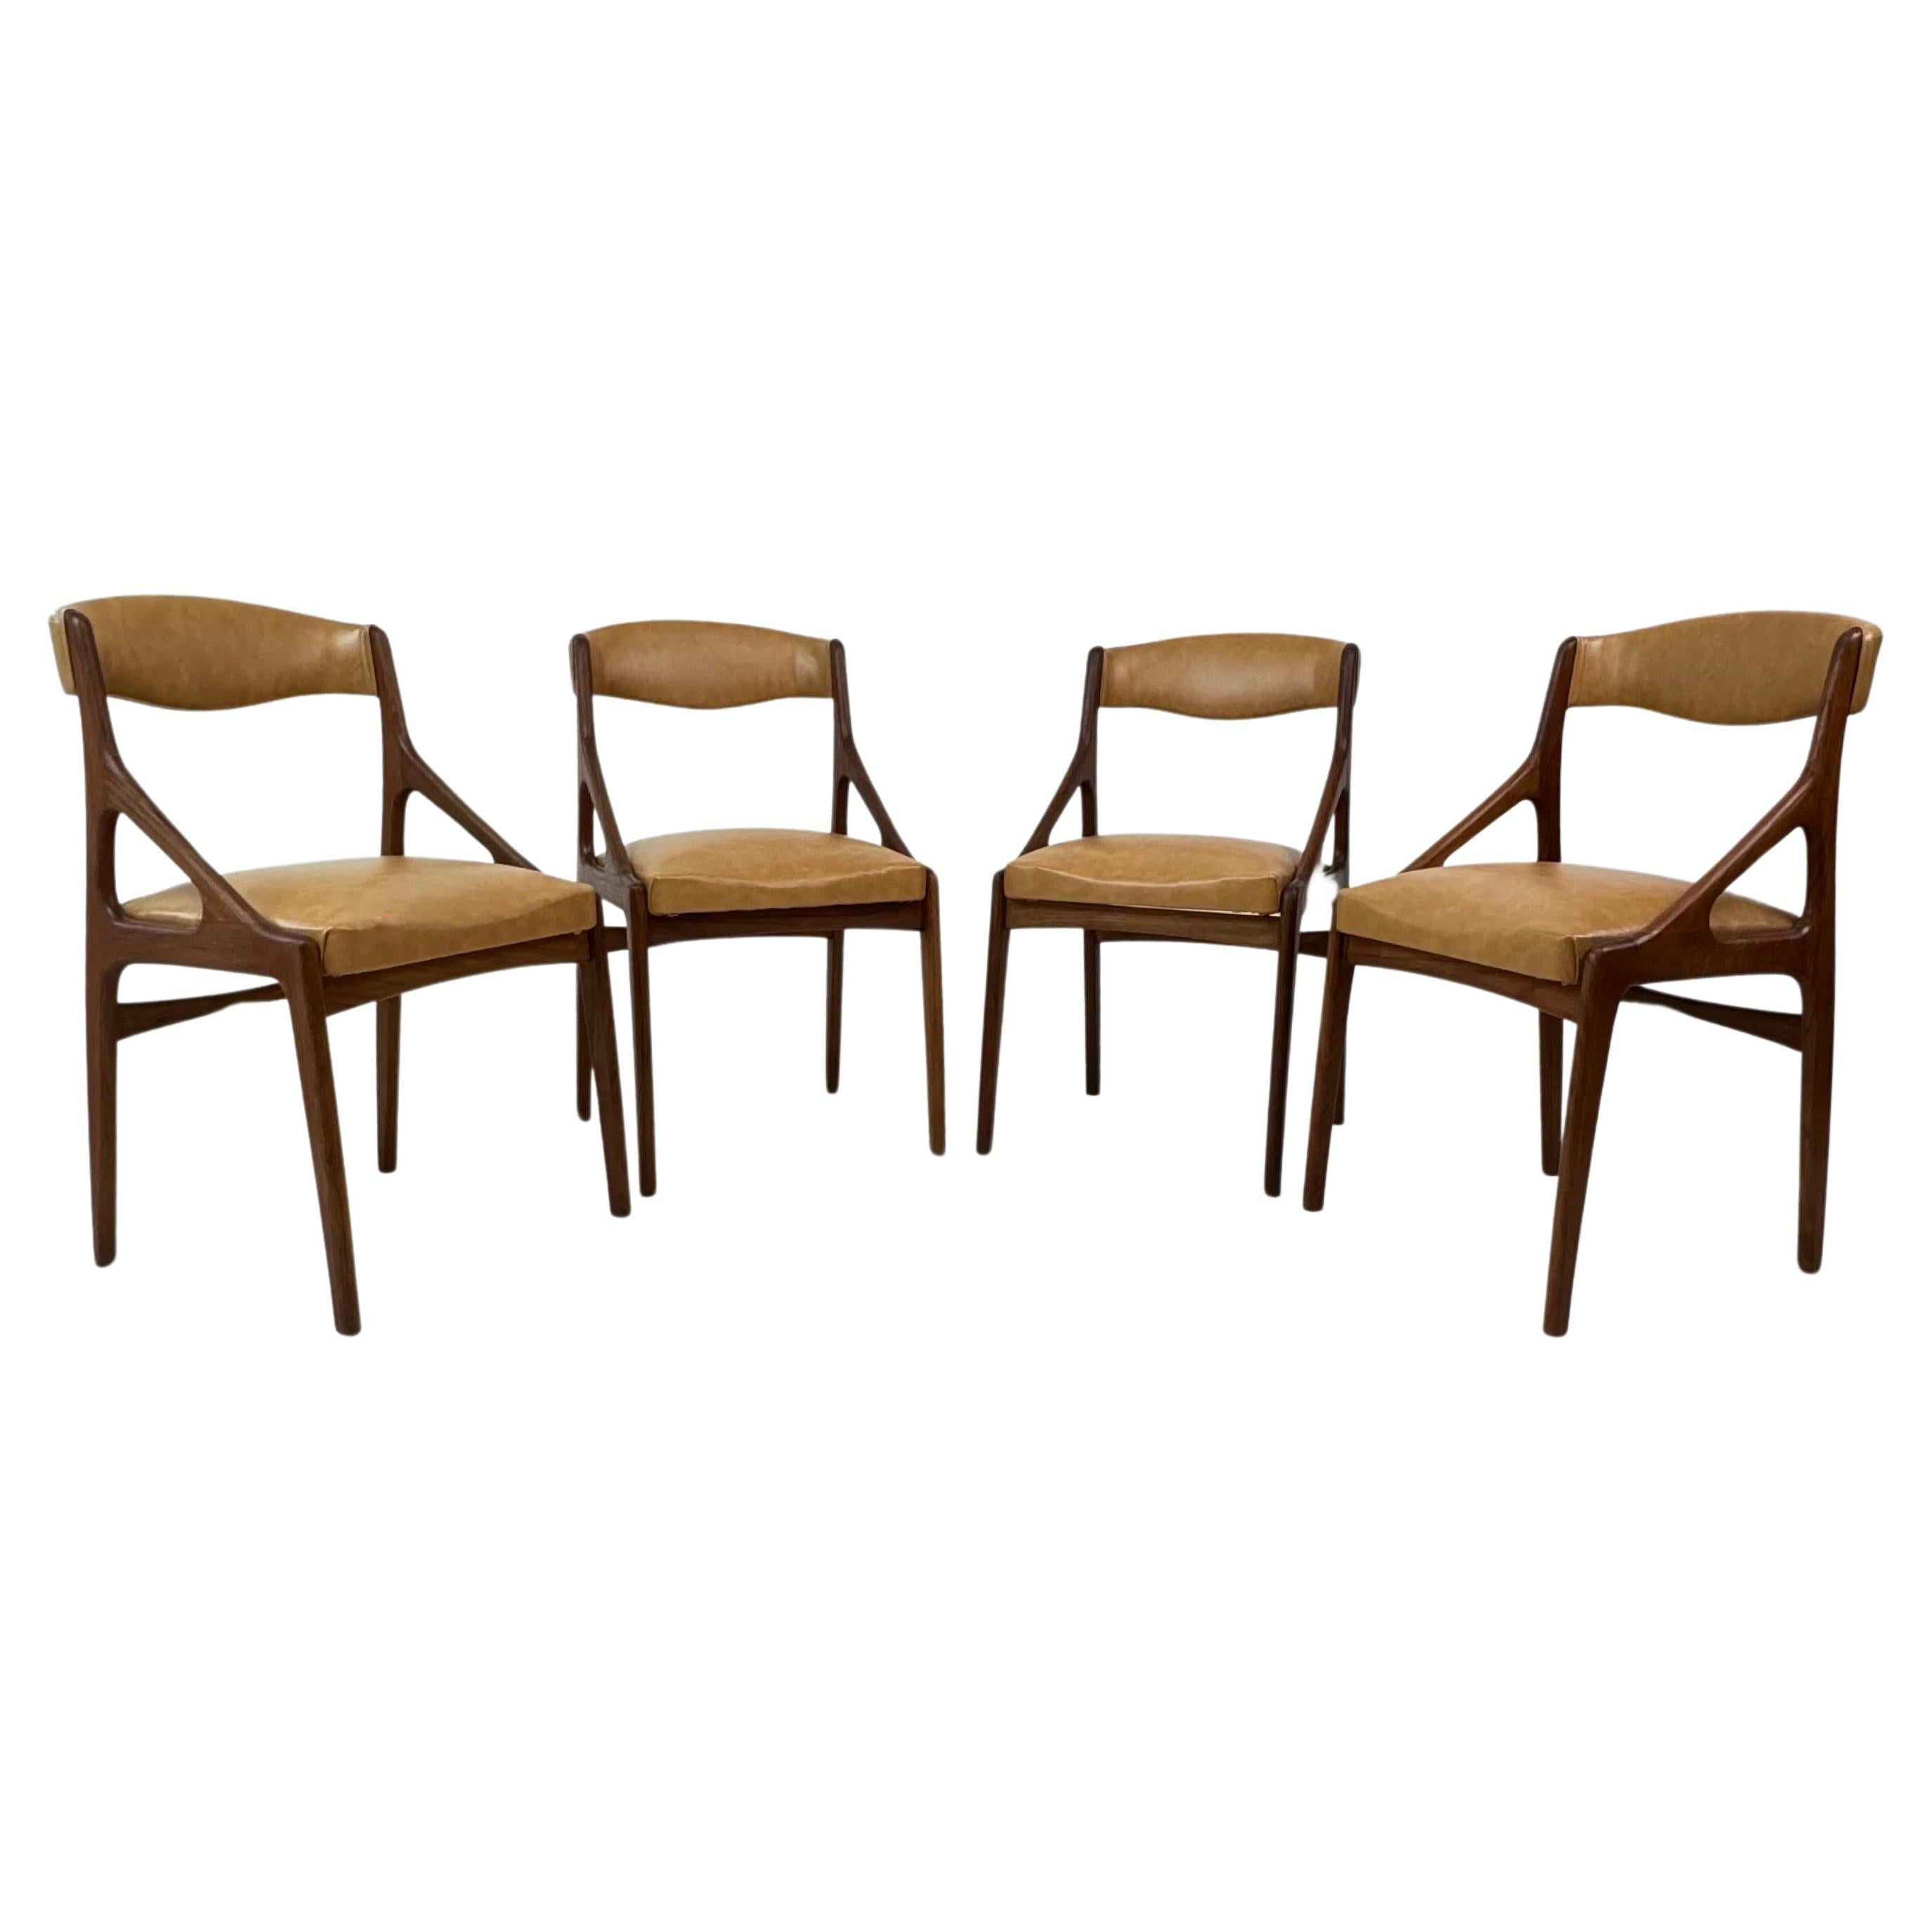 Set of Four Midcentury Modern Teak and Leatherette Dining Chairs c.1960's